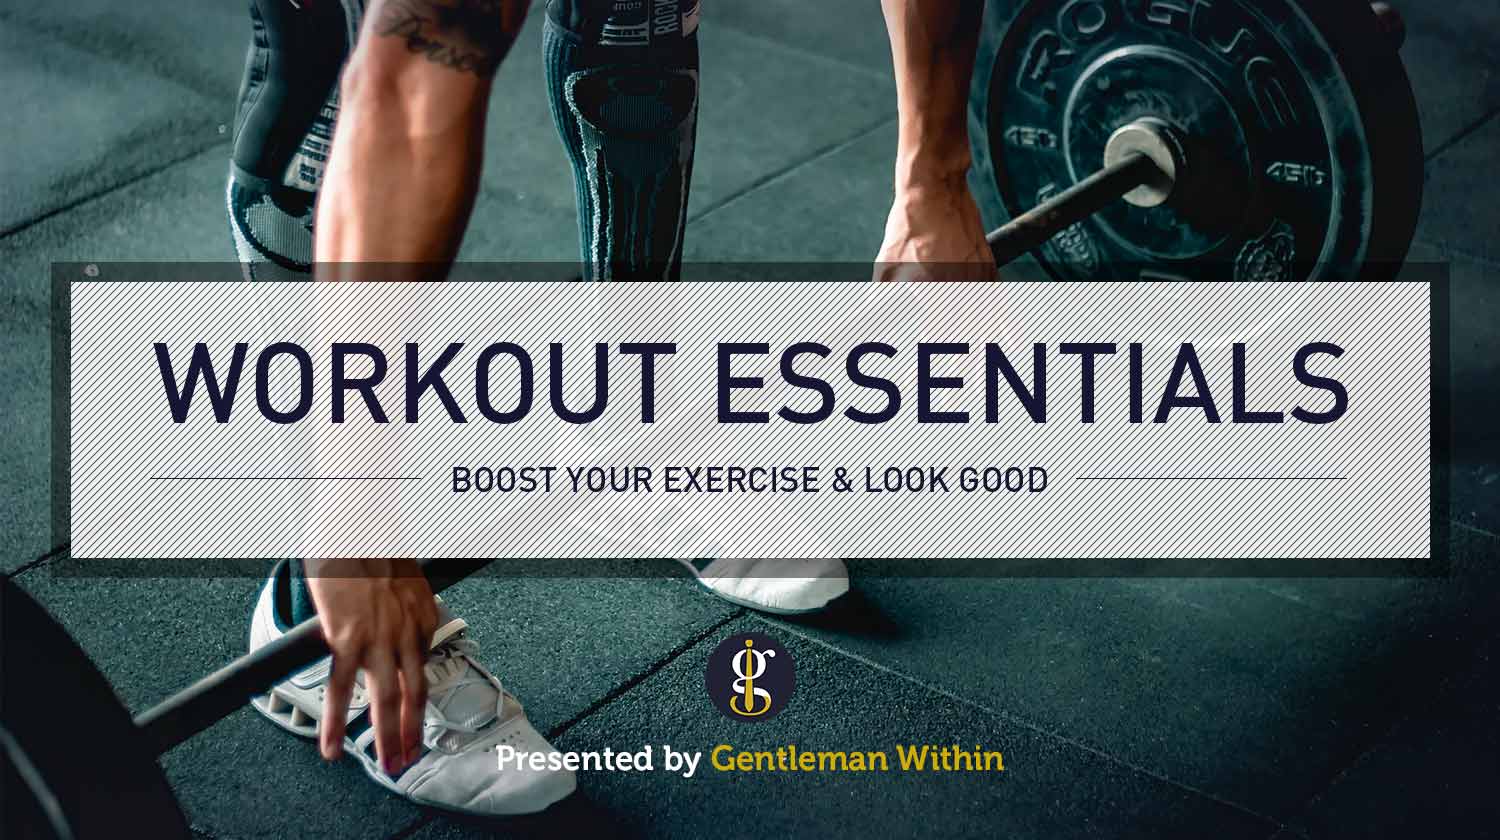 https://www.gentlemanwithin.com/wp-content/uploads/2019/09/8-Workout-Essentials-To-Boost-Your-Exercise-And-Look-Good-Hero.jpg